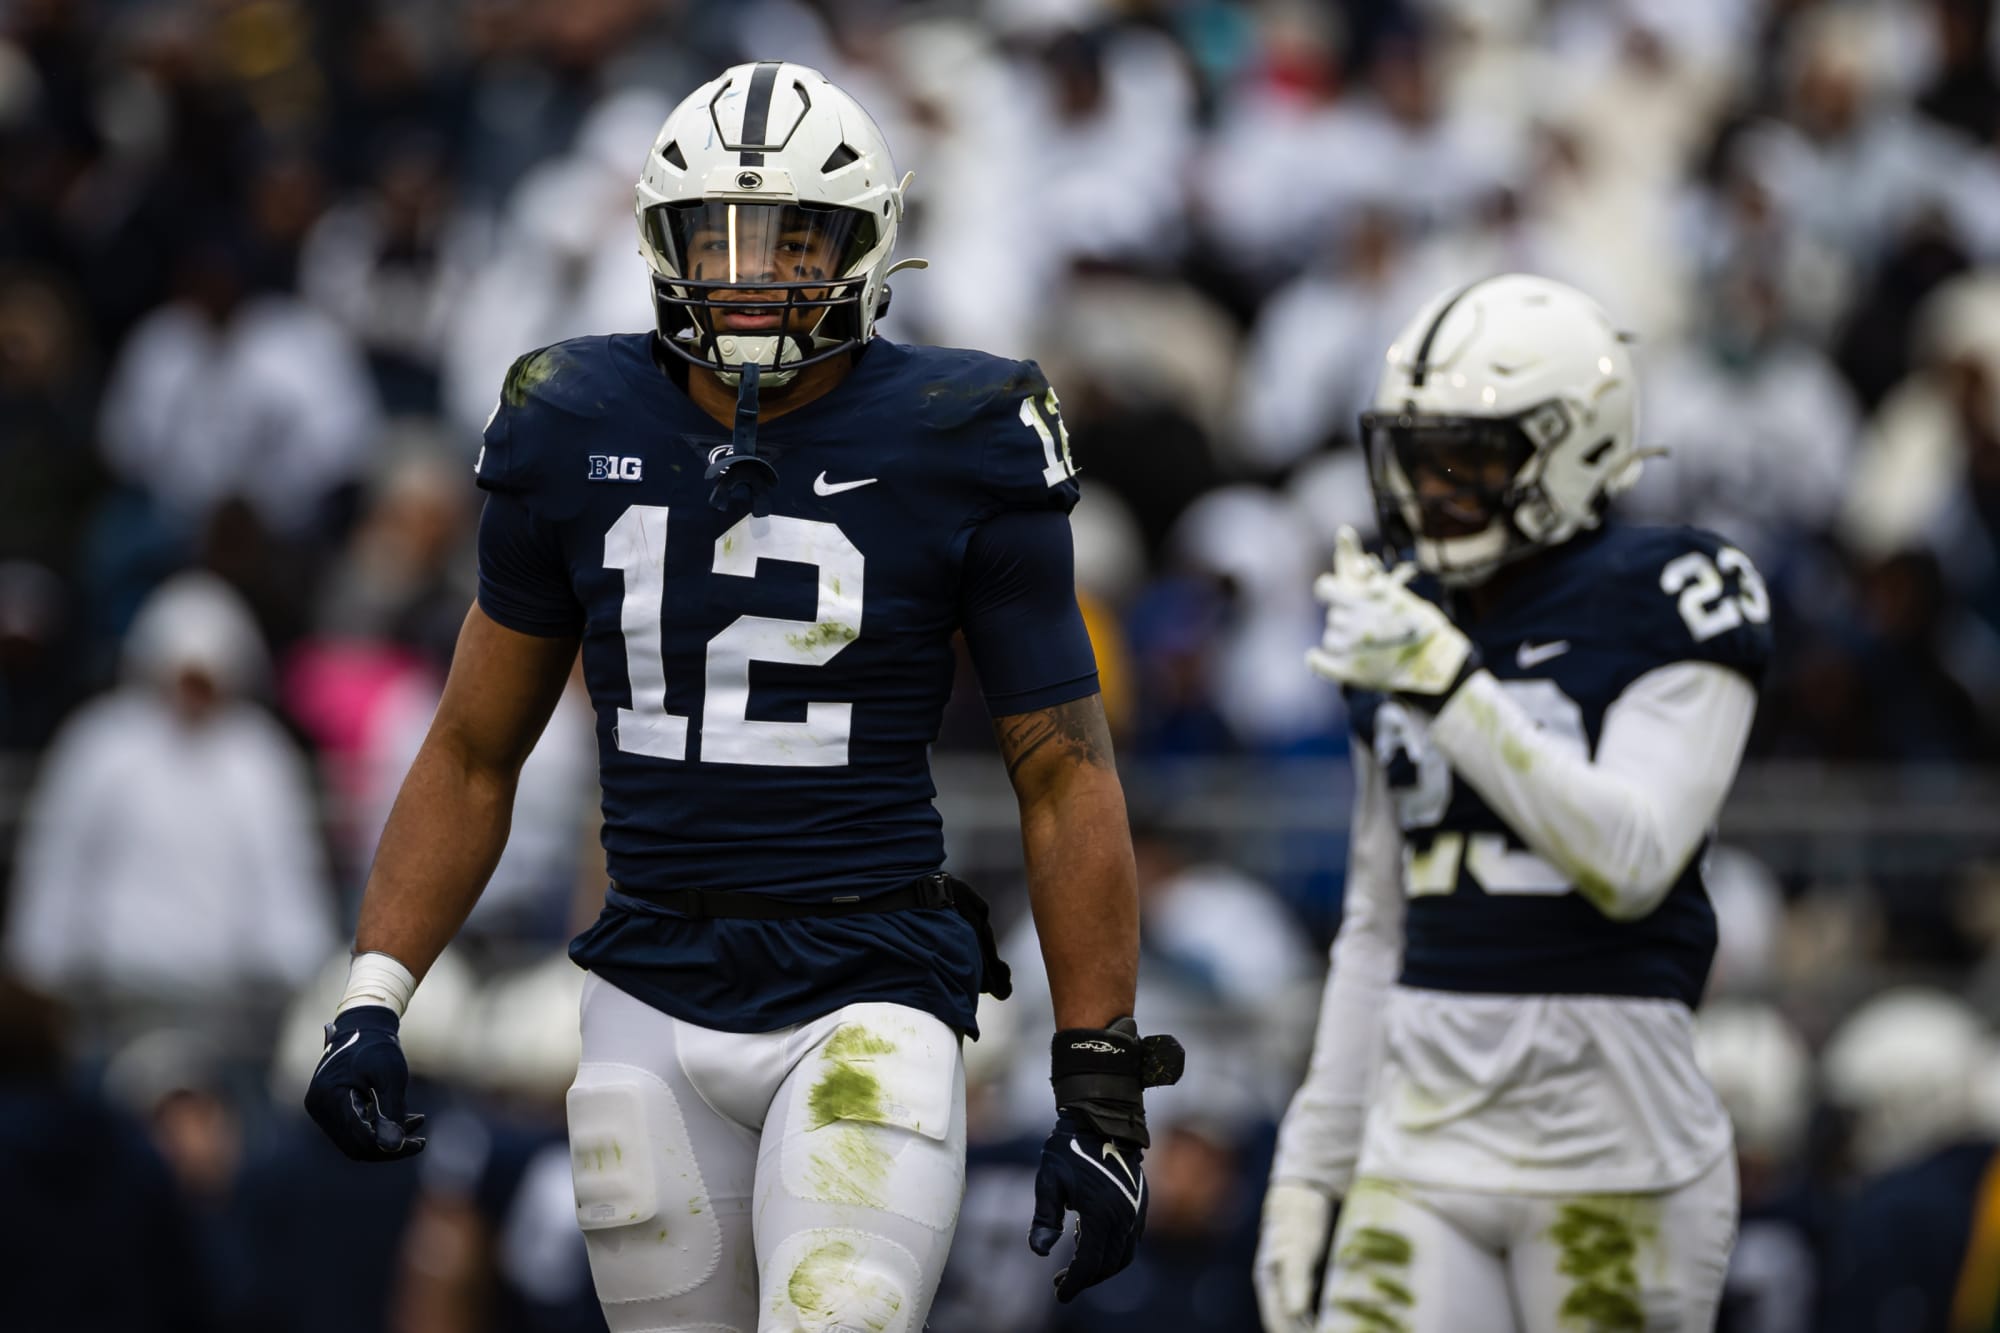 Penn State Football position grades for the linebackers